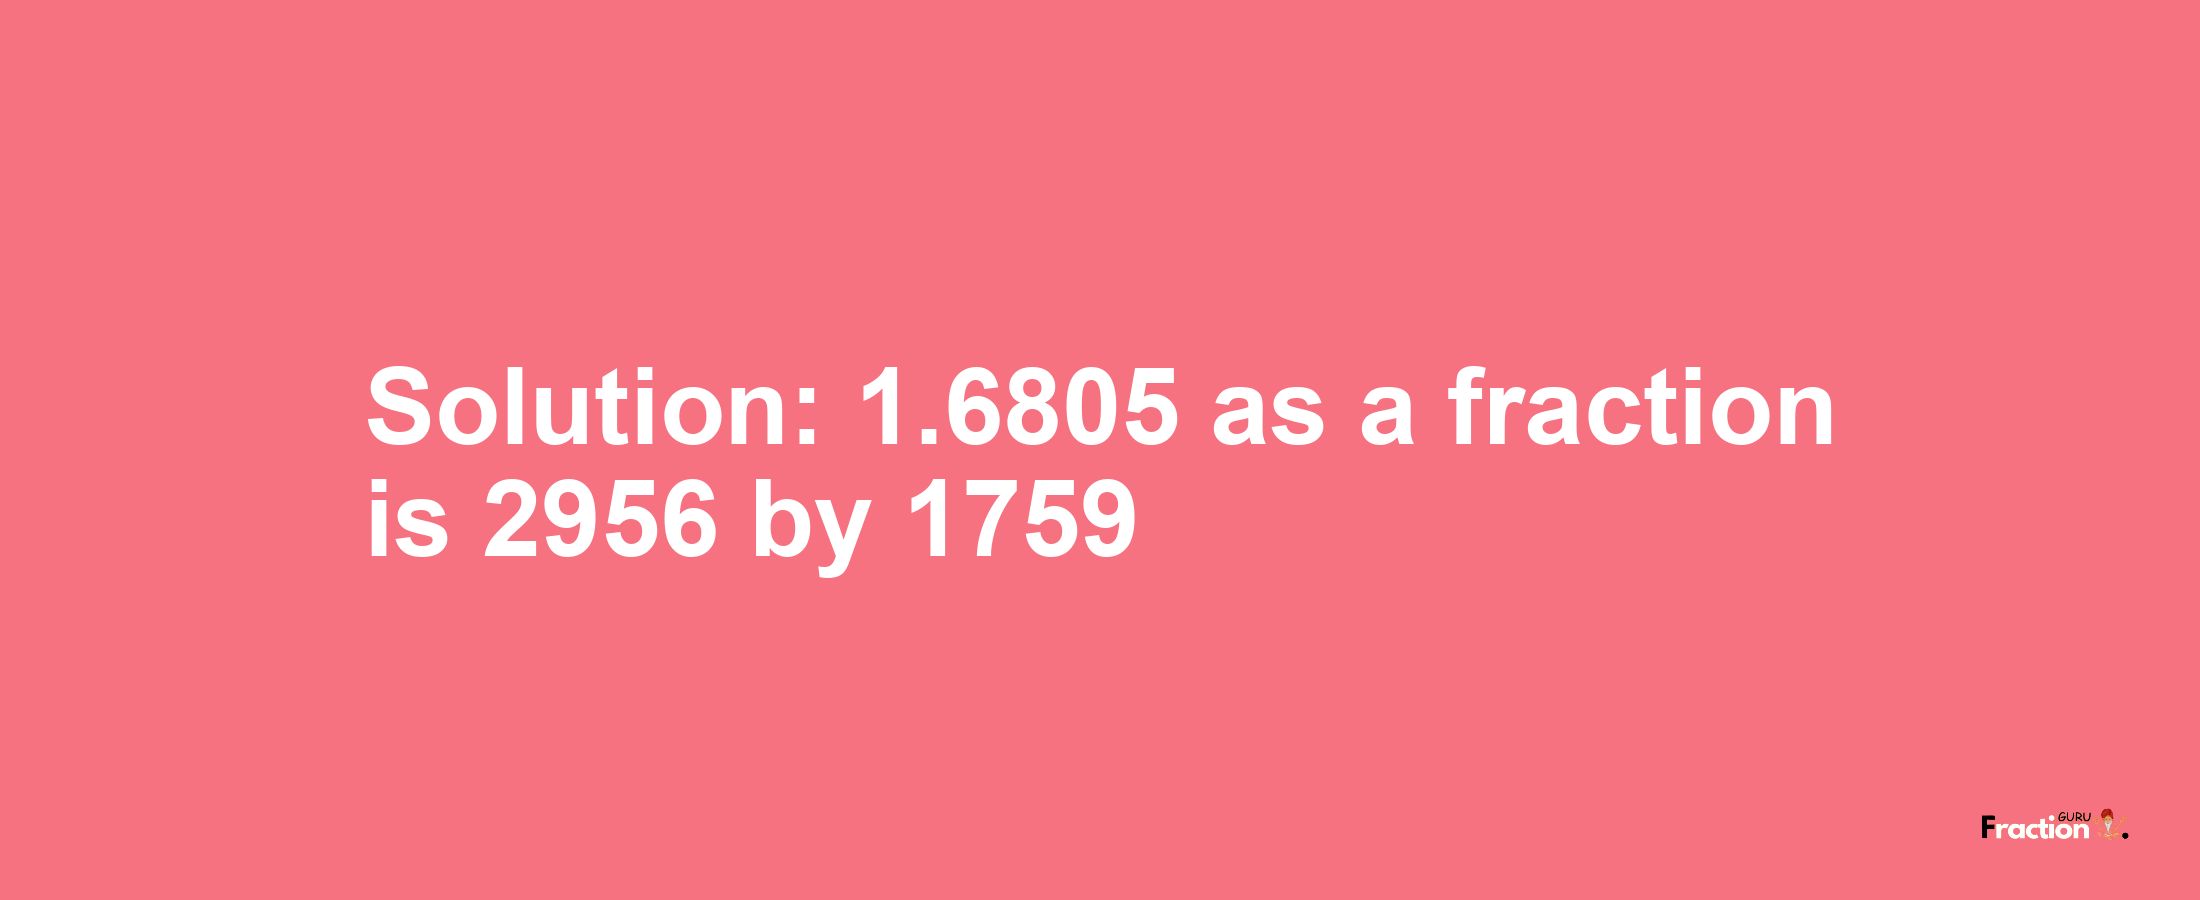 Solution:1.6805 as a fraction is 2956/1759